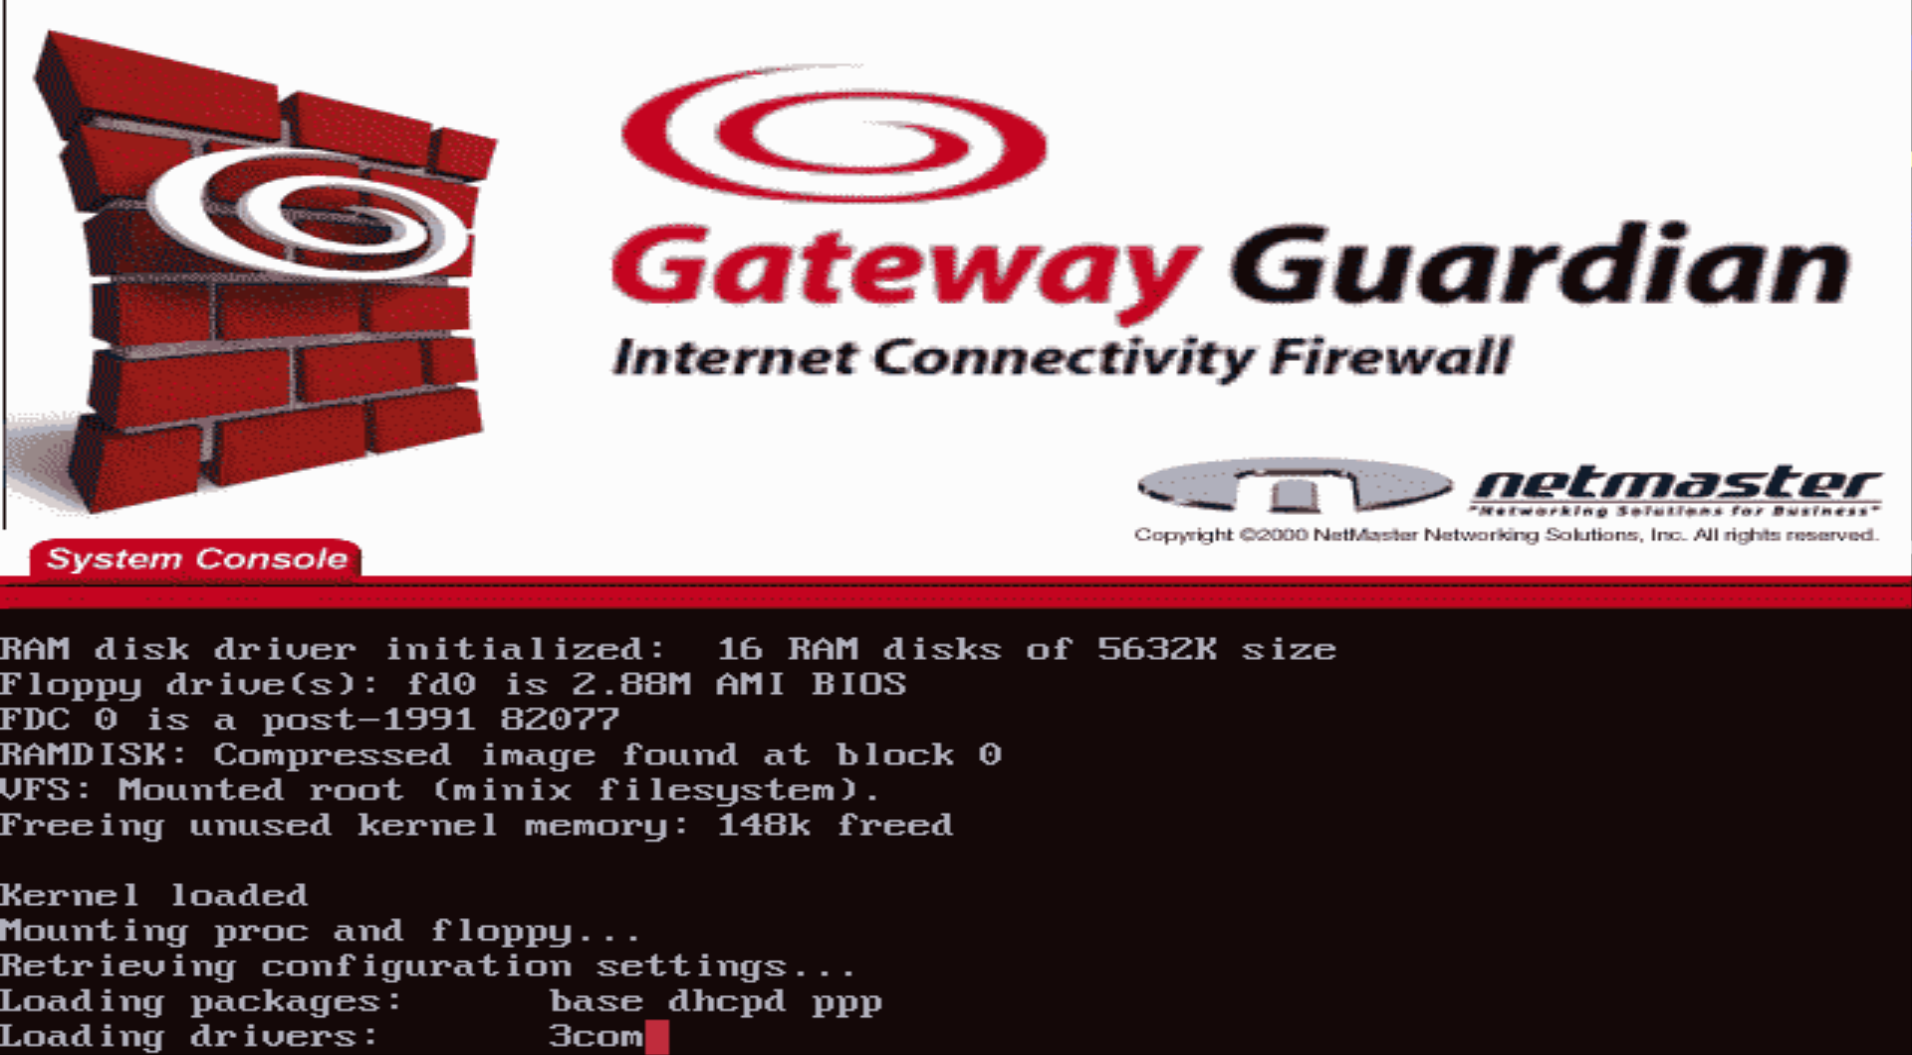 Linux as a Router/Firewall Appliance in the 1990's